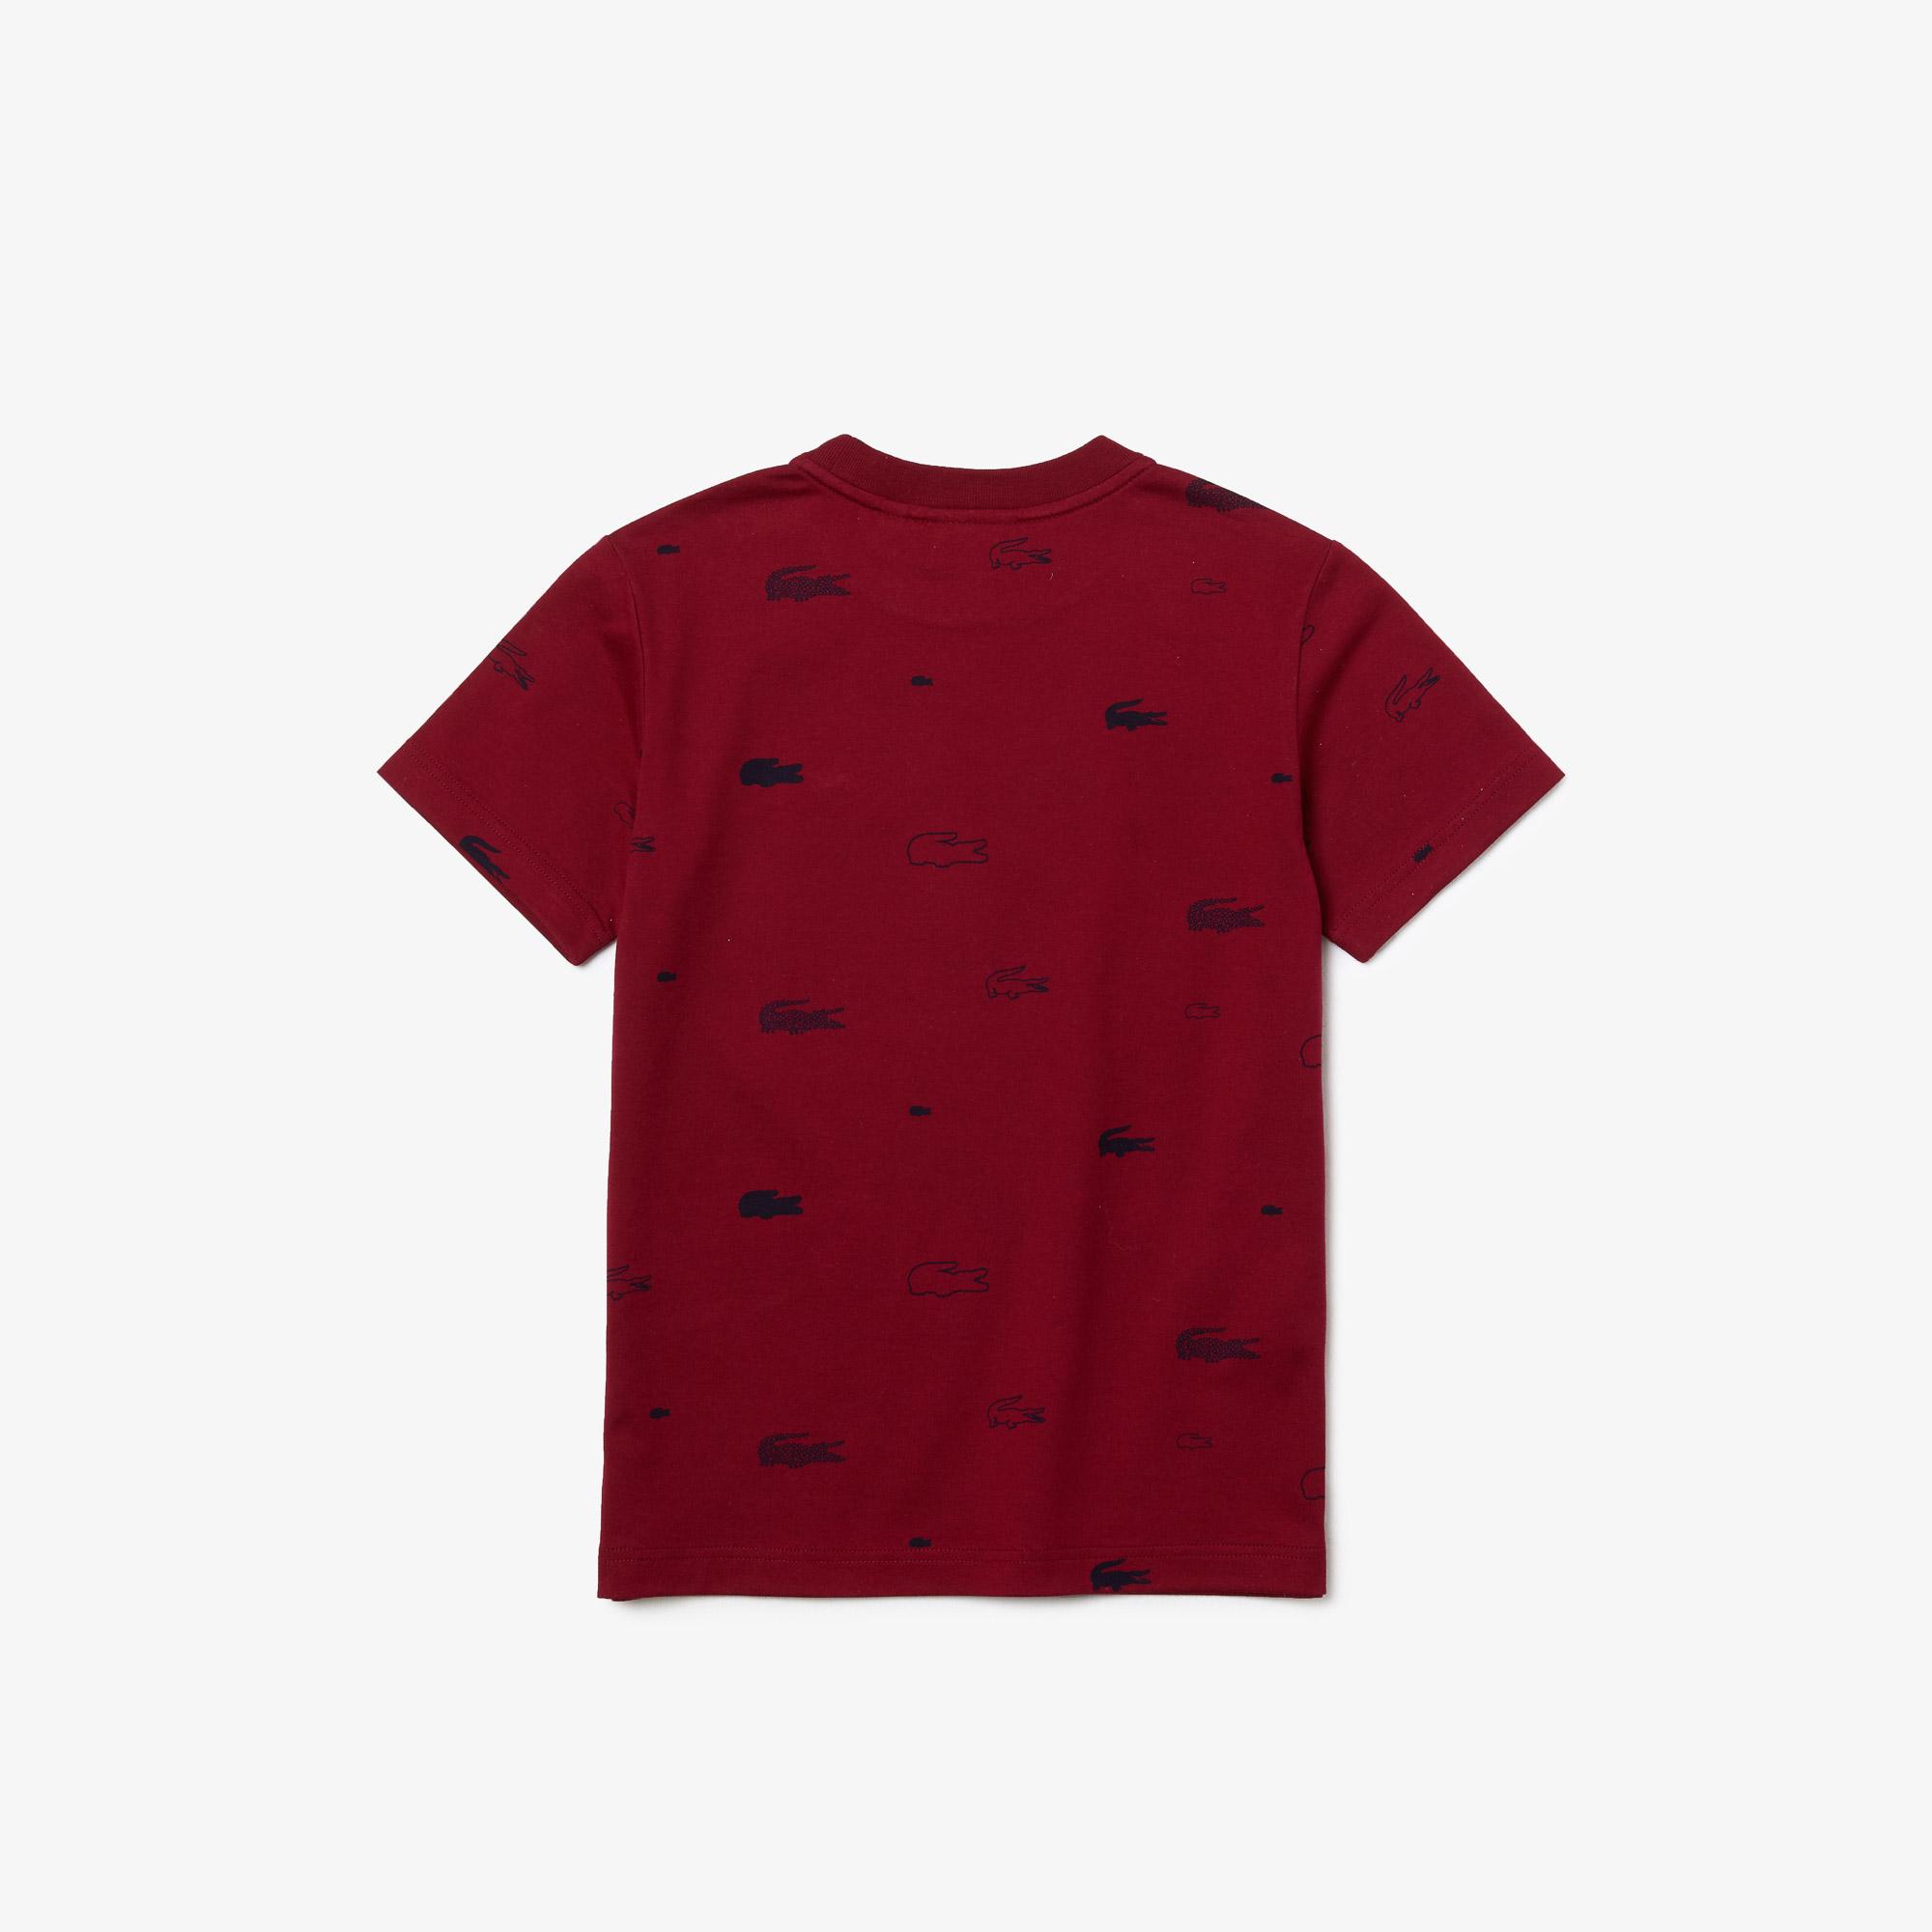 Lacoste Boys' Made In France Print Organic Cotton T-Shirt